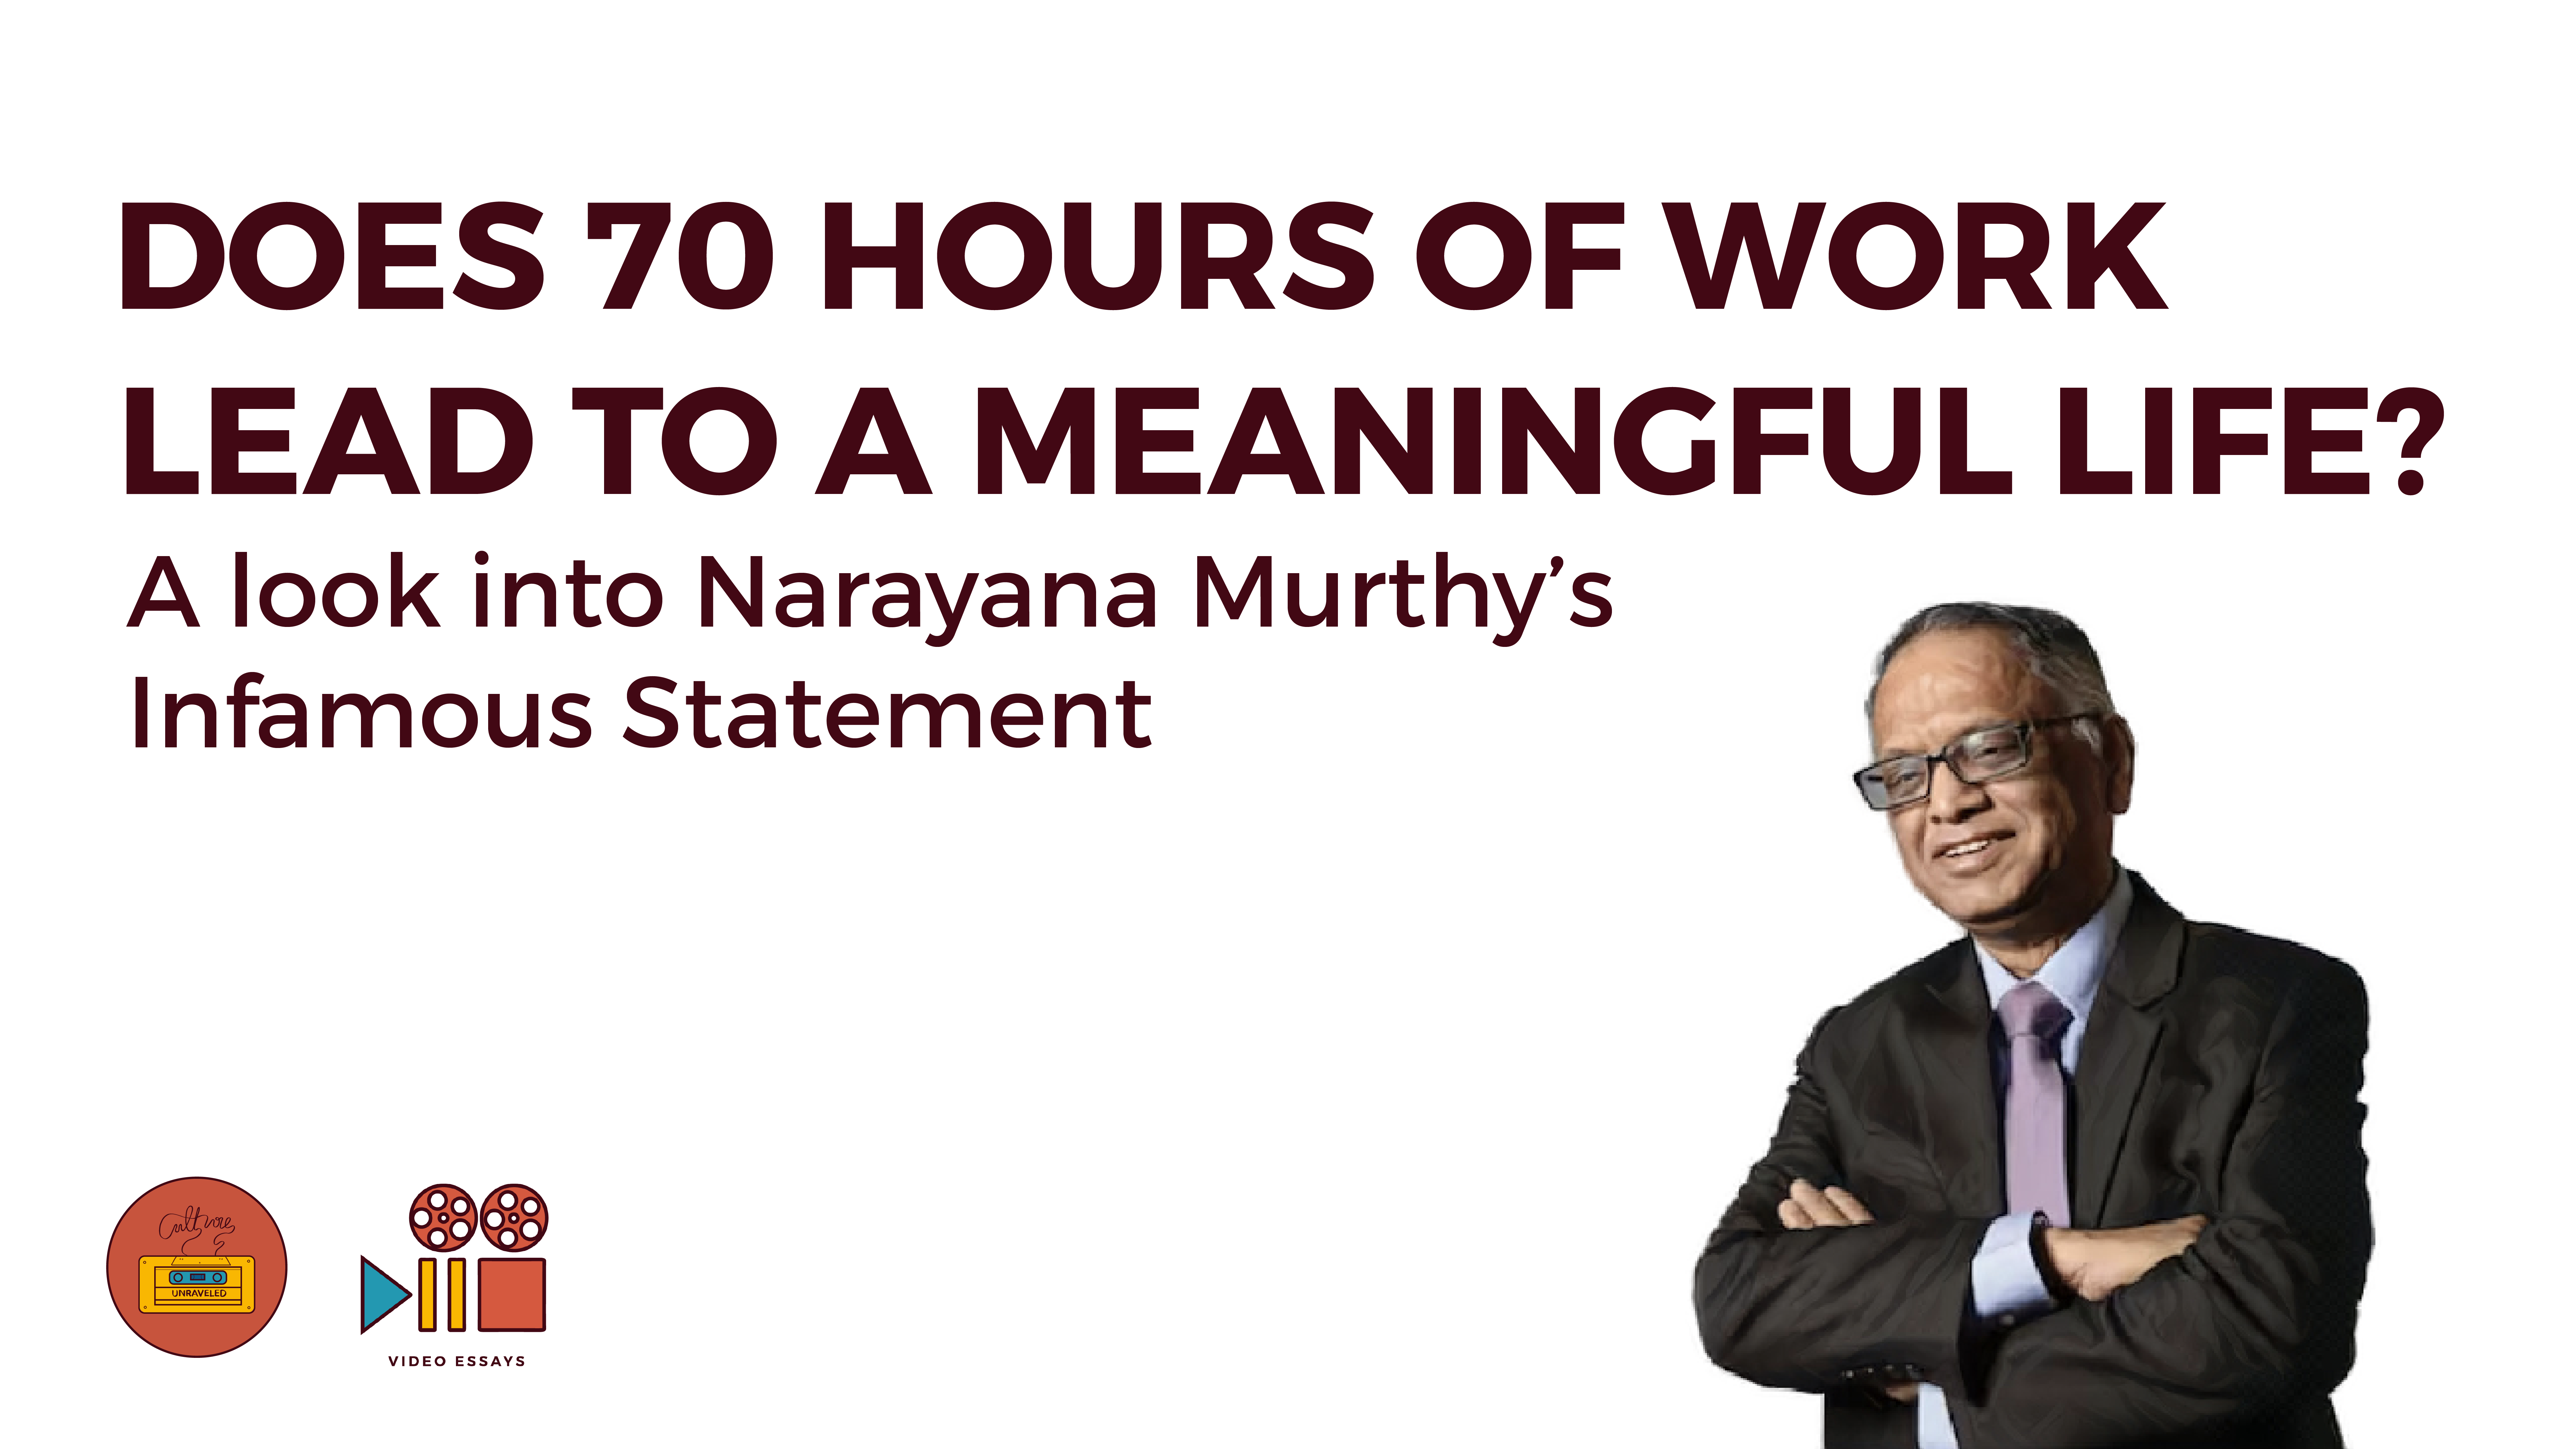 Does 70 Hours of Work lead to a Meaningful Life? A Look into Narayana Murthy’s Infamous Statement